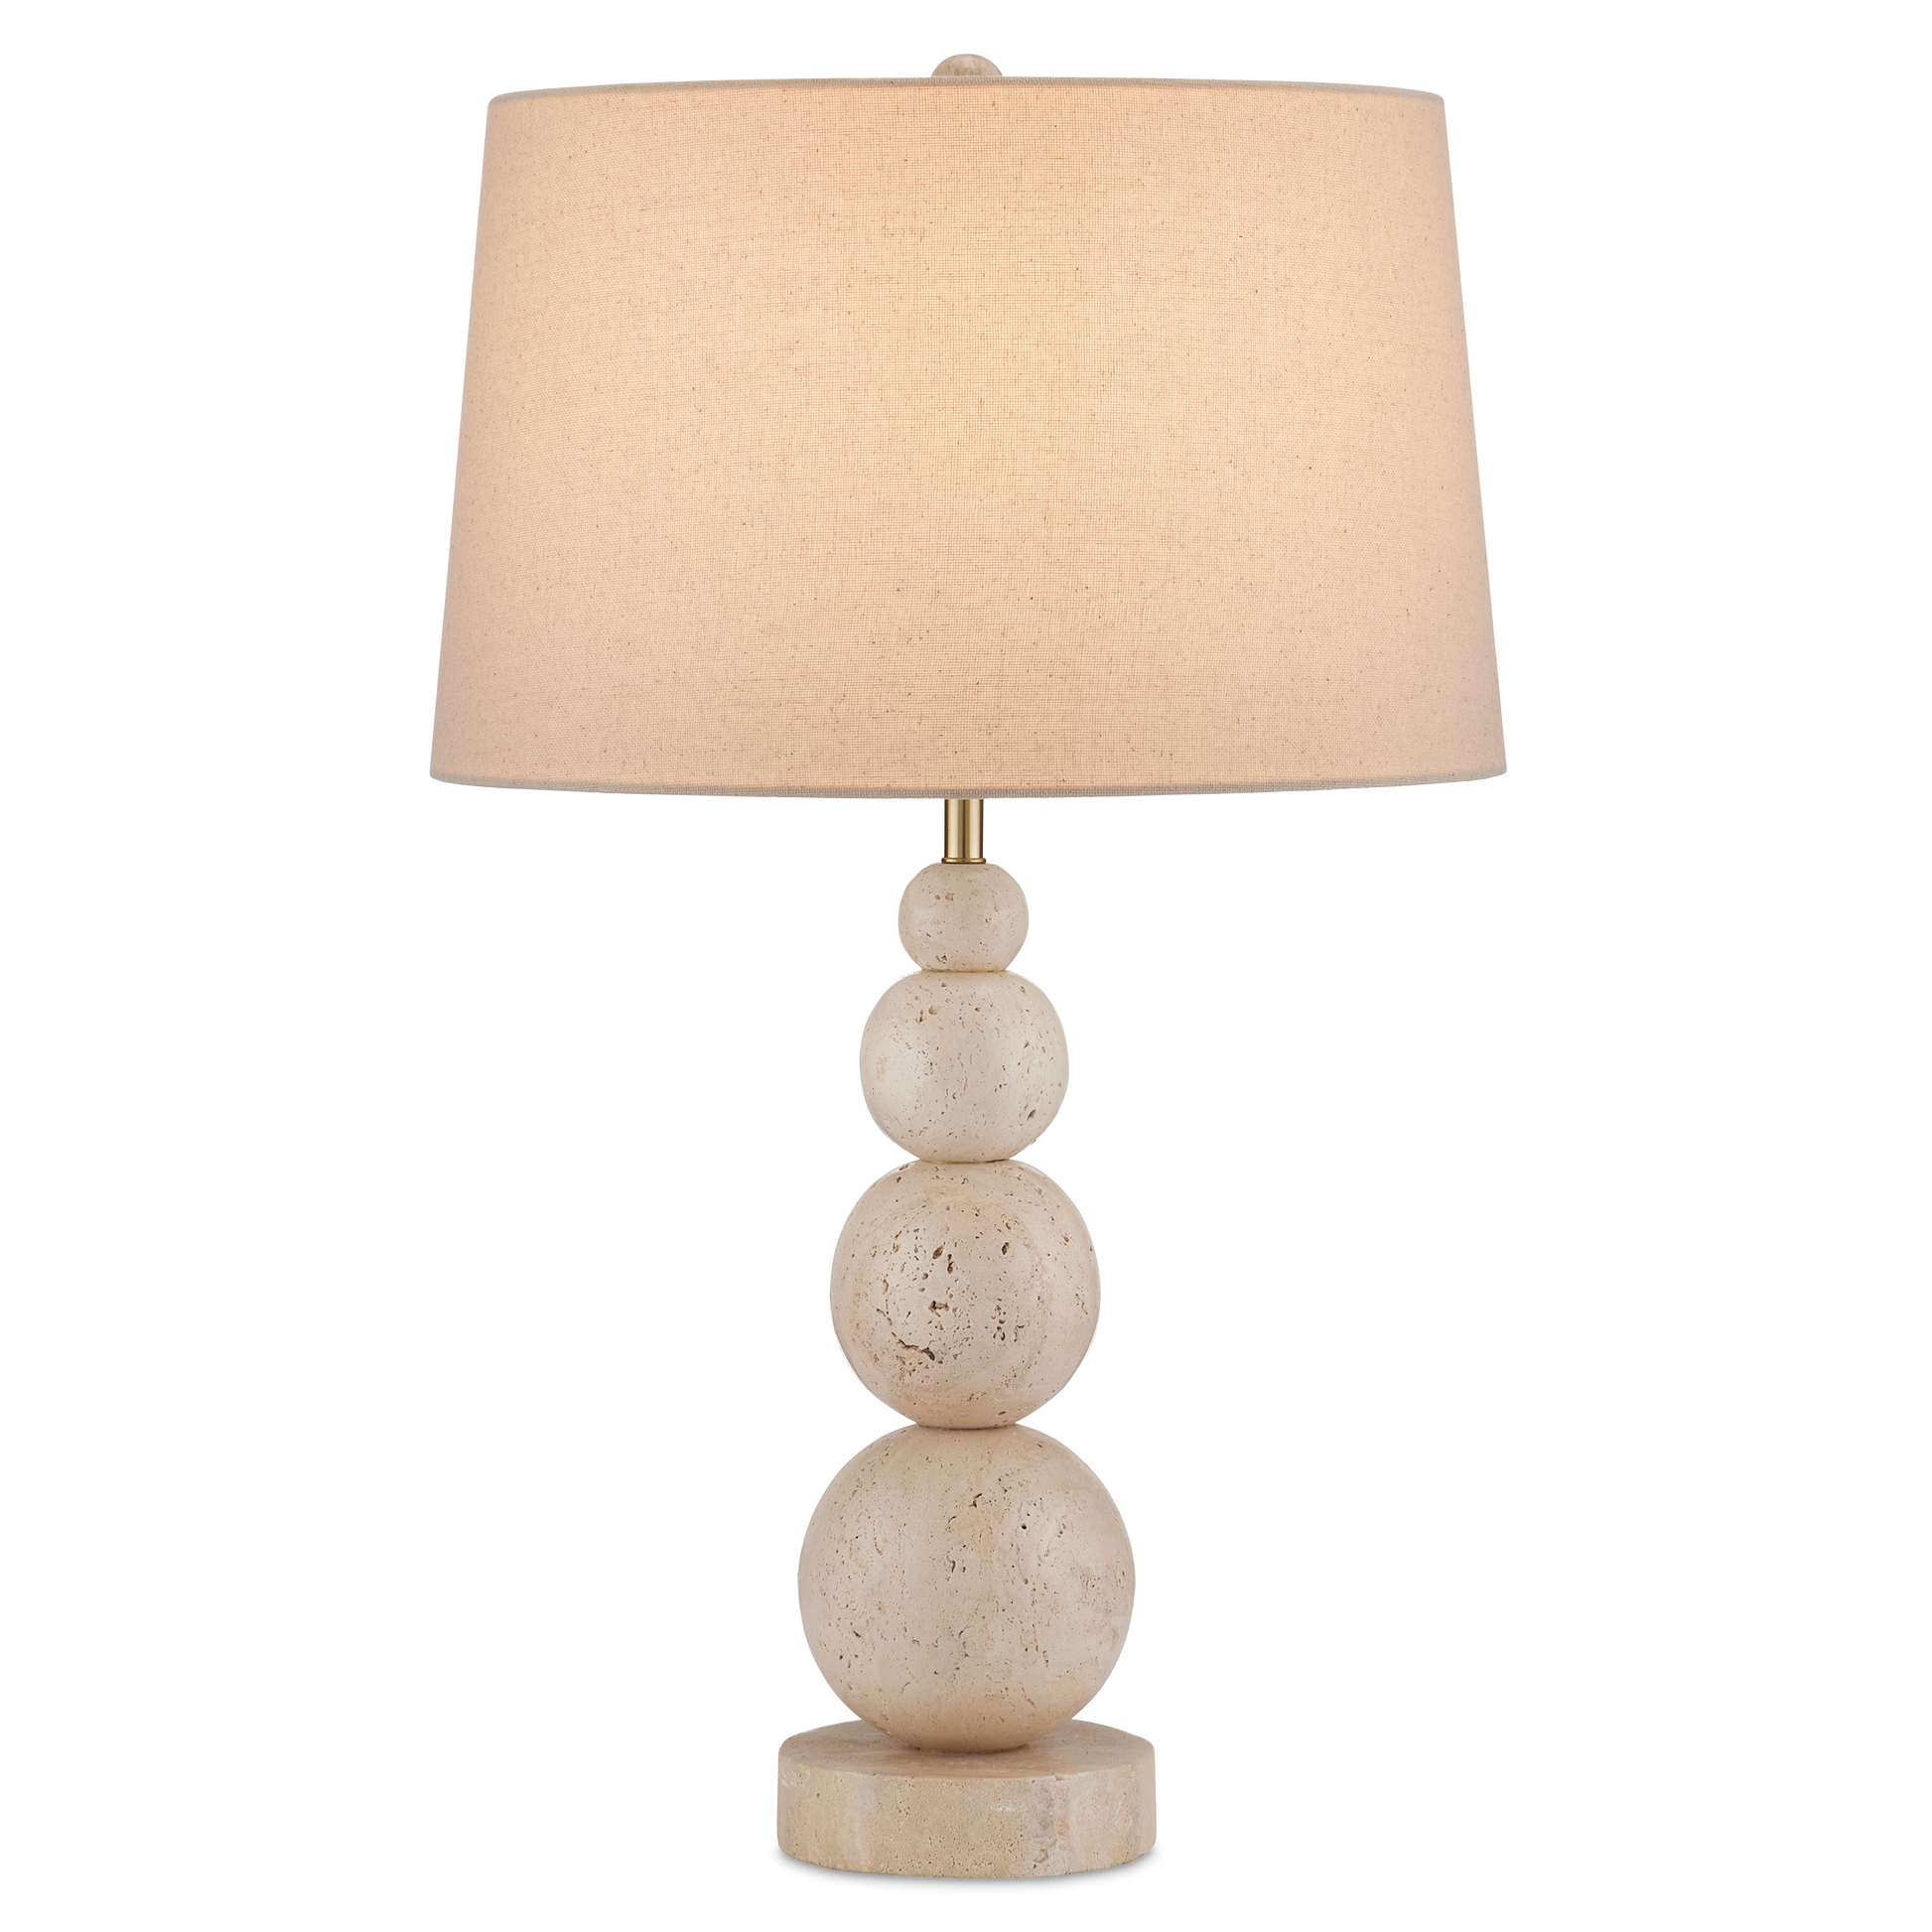 The Niobe Table Lamp by Currey & Company | Luxury Table Lamps | Willow & Albert Home